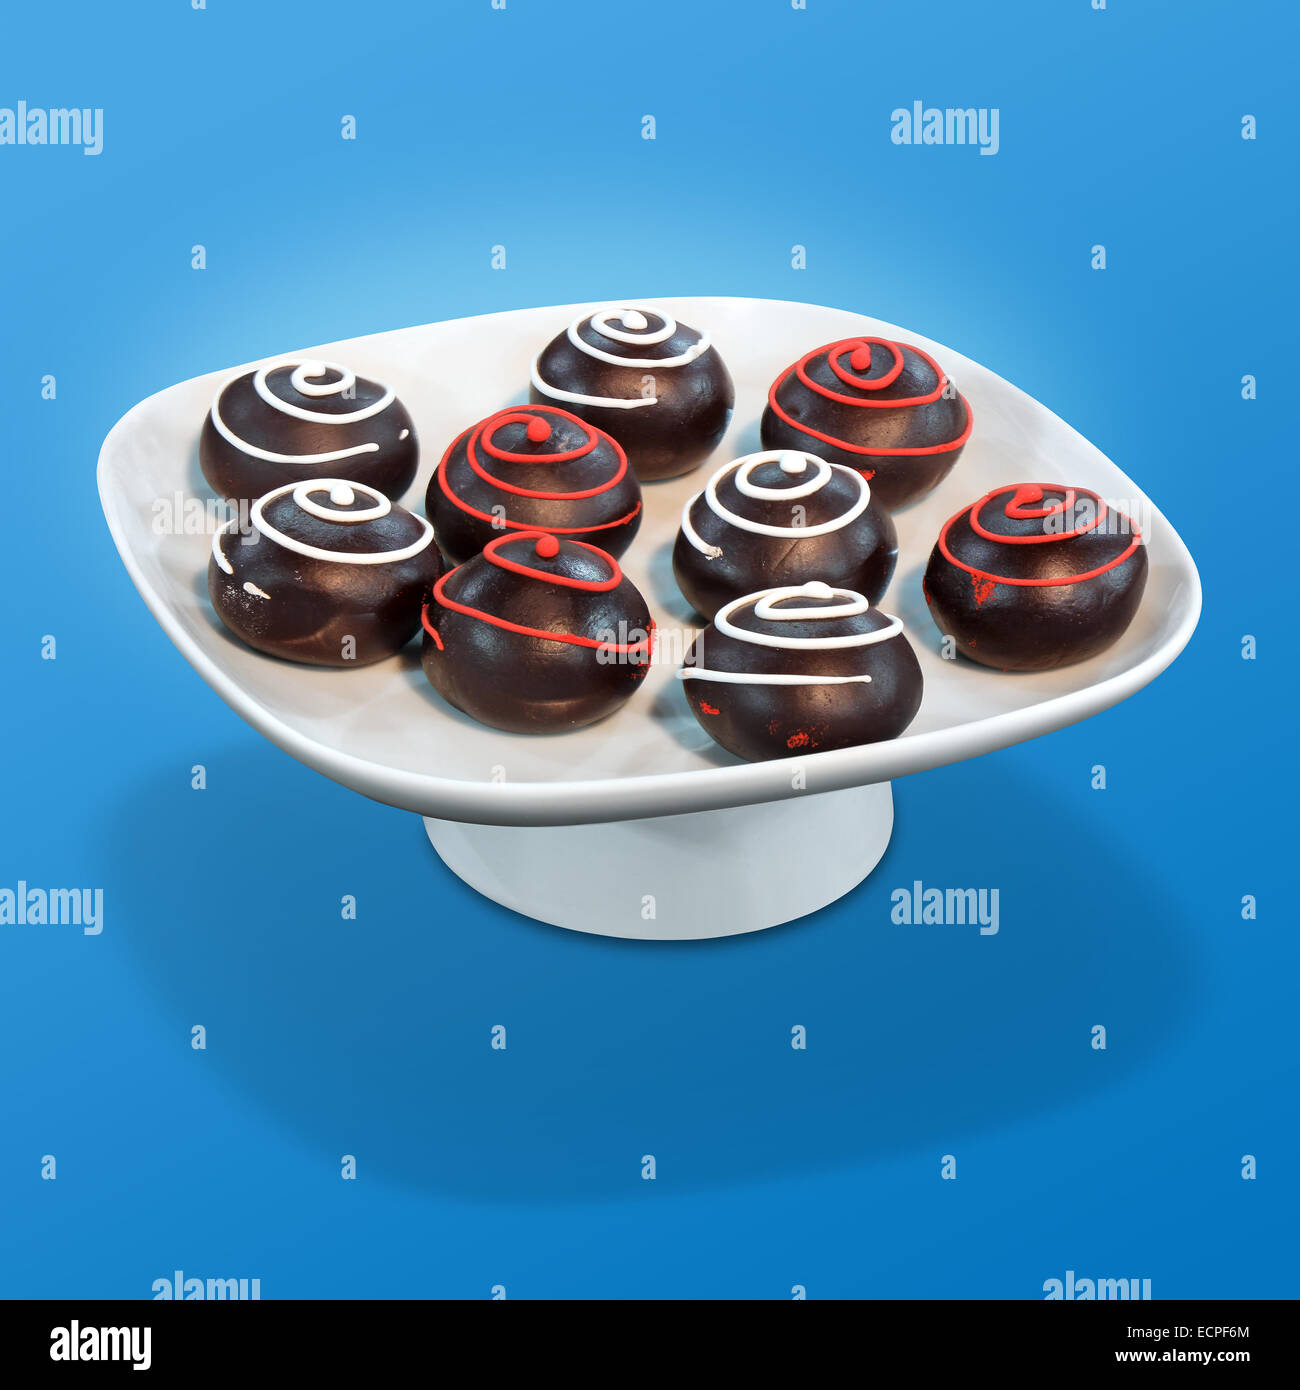 Chocolate balls Sweet dessert on a white bowl and a blue background Stock Photo